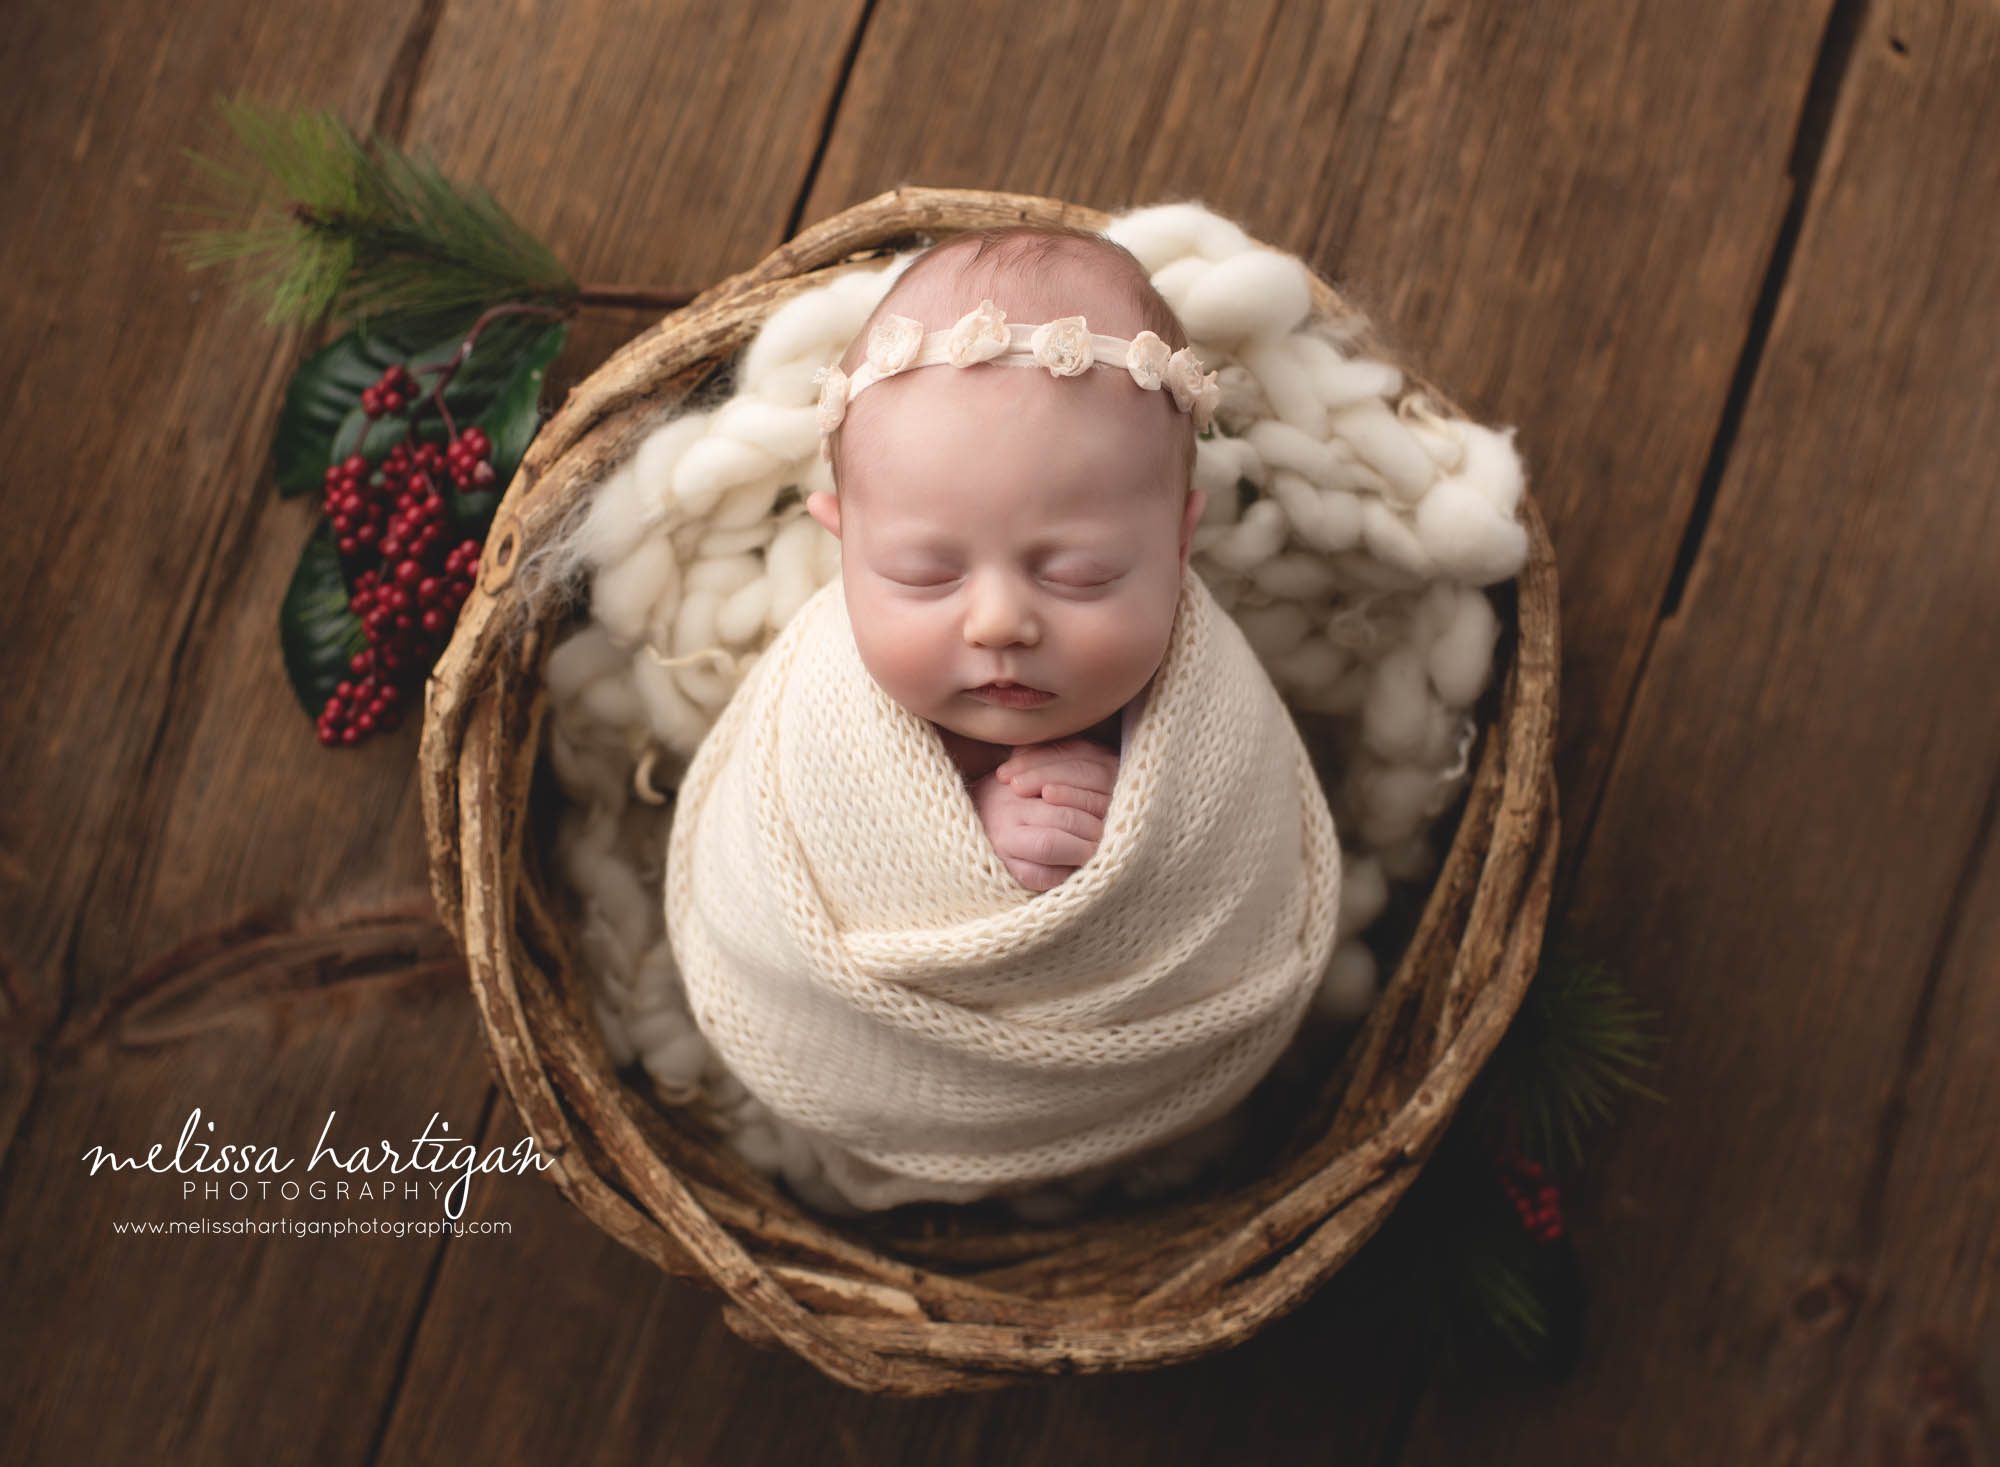 newborn baby girl wrapped in cream wrap knitted cream chunky knitted layer posed in wicker basket with holiday berry element ct newborn photography